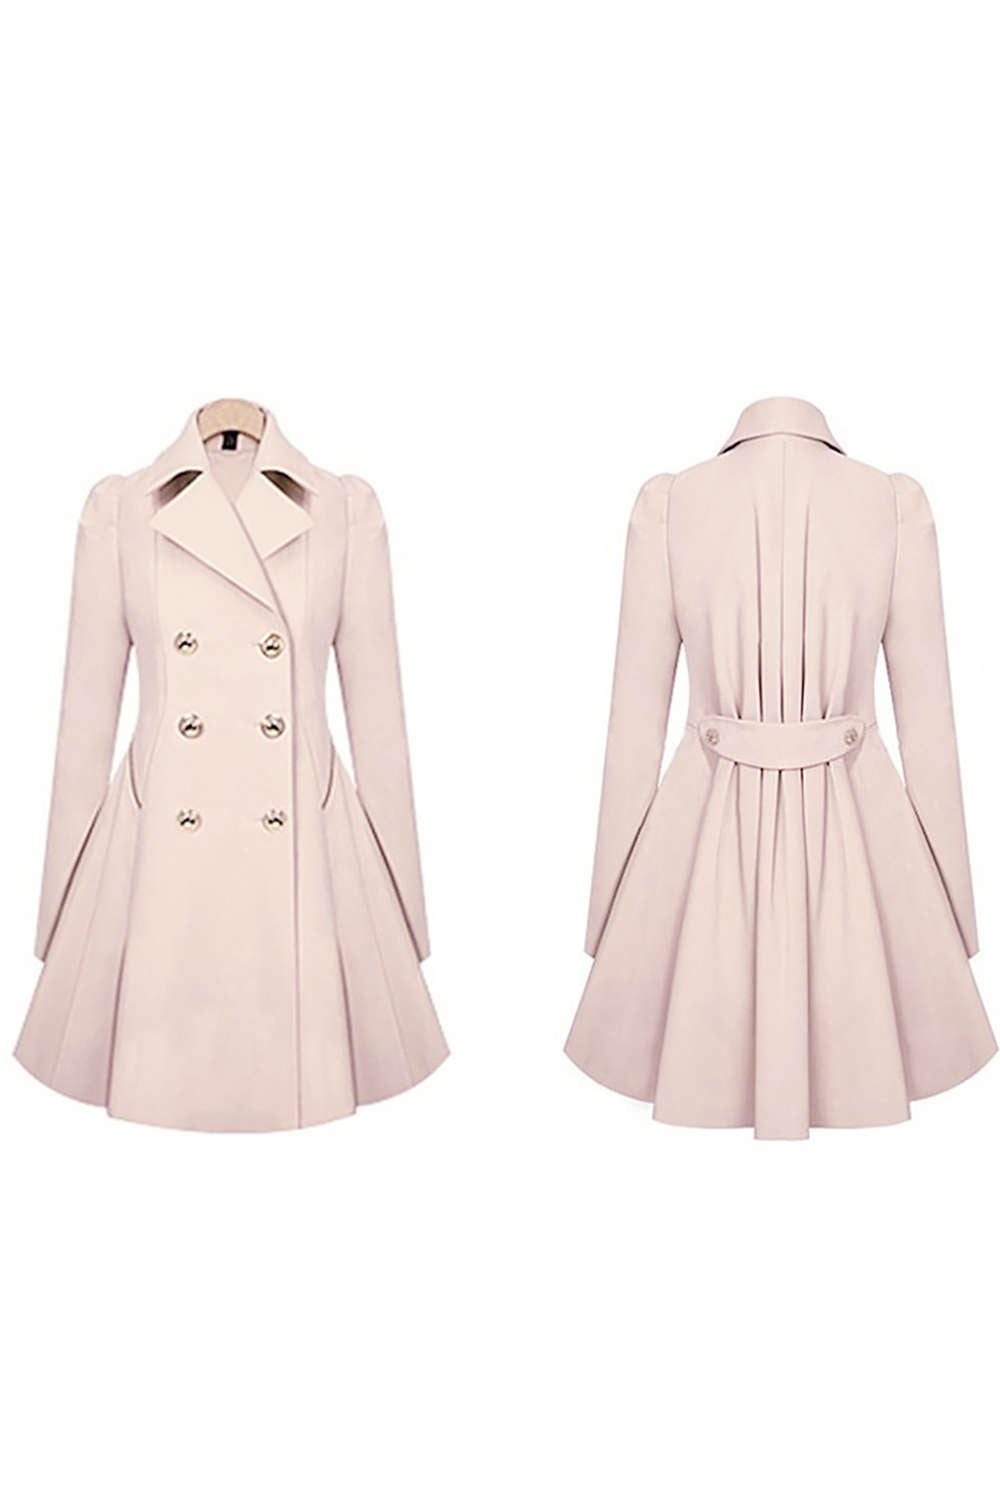 Iyasson Women's Double Breasted Trench Coat